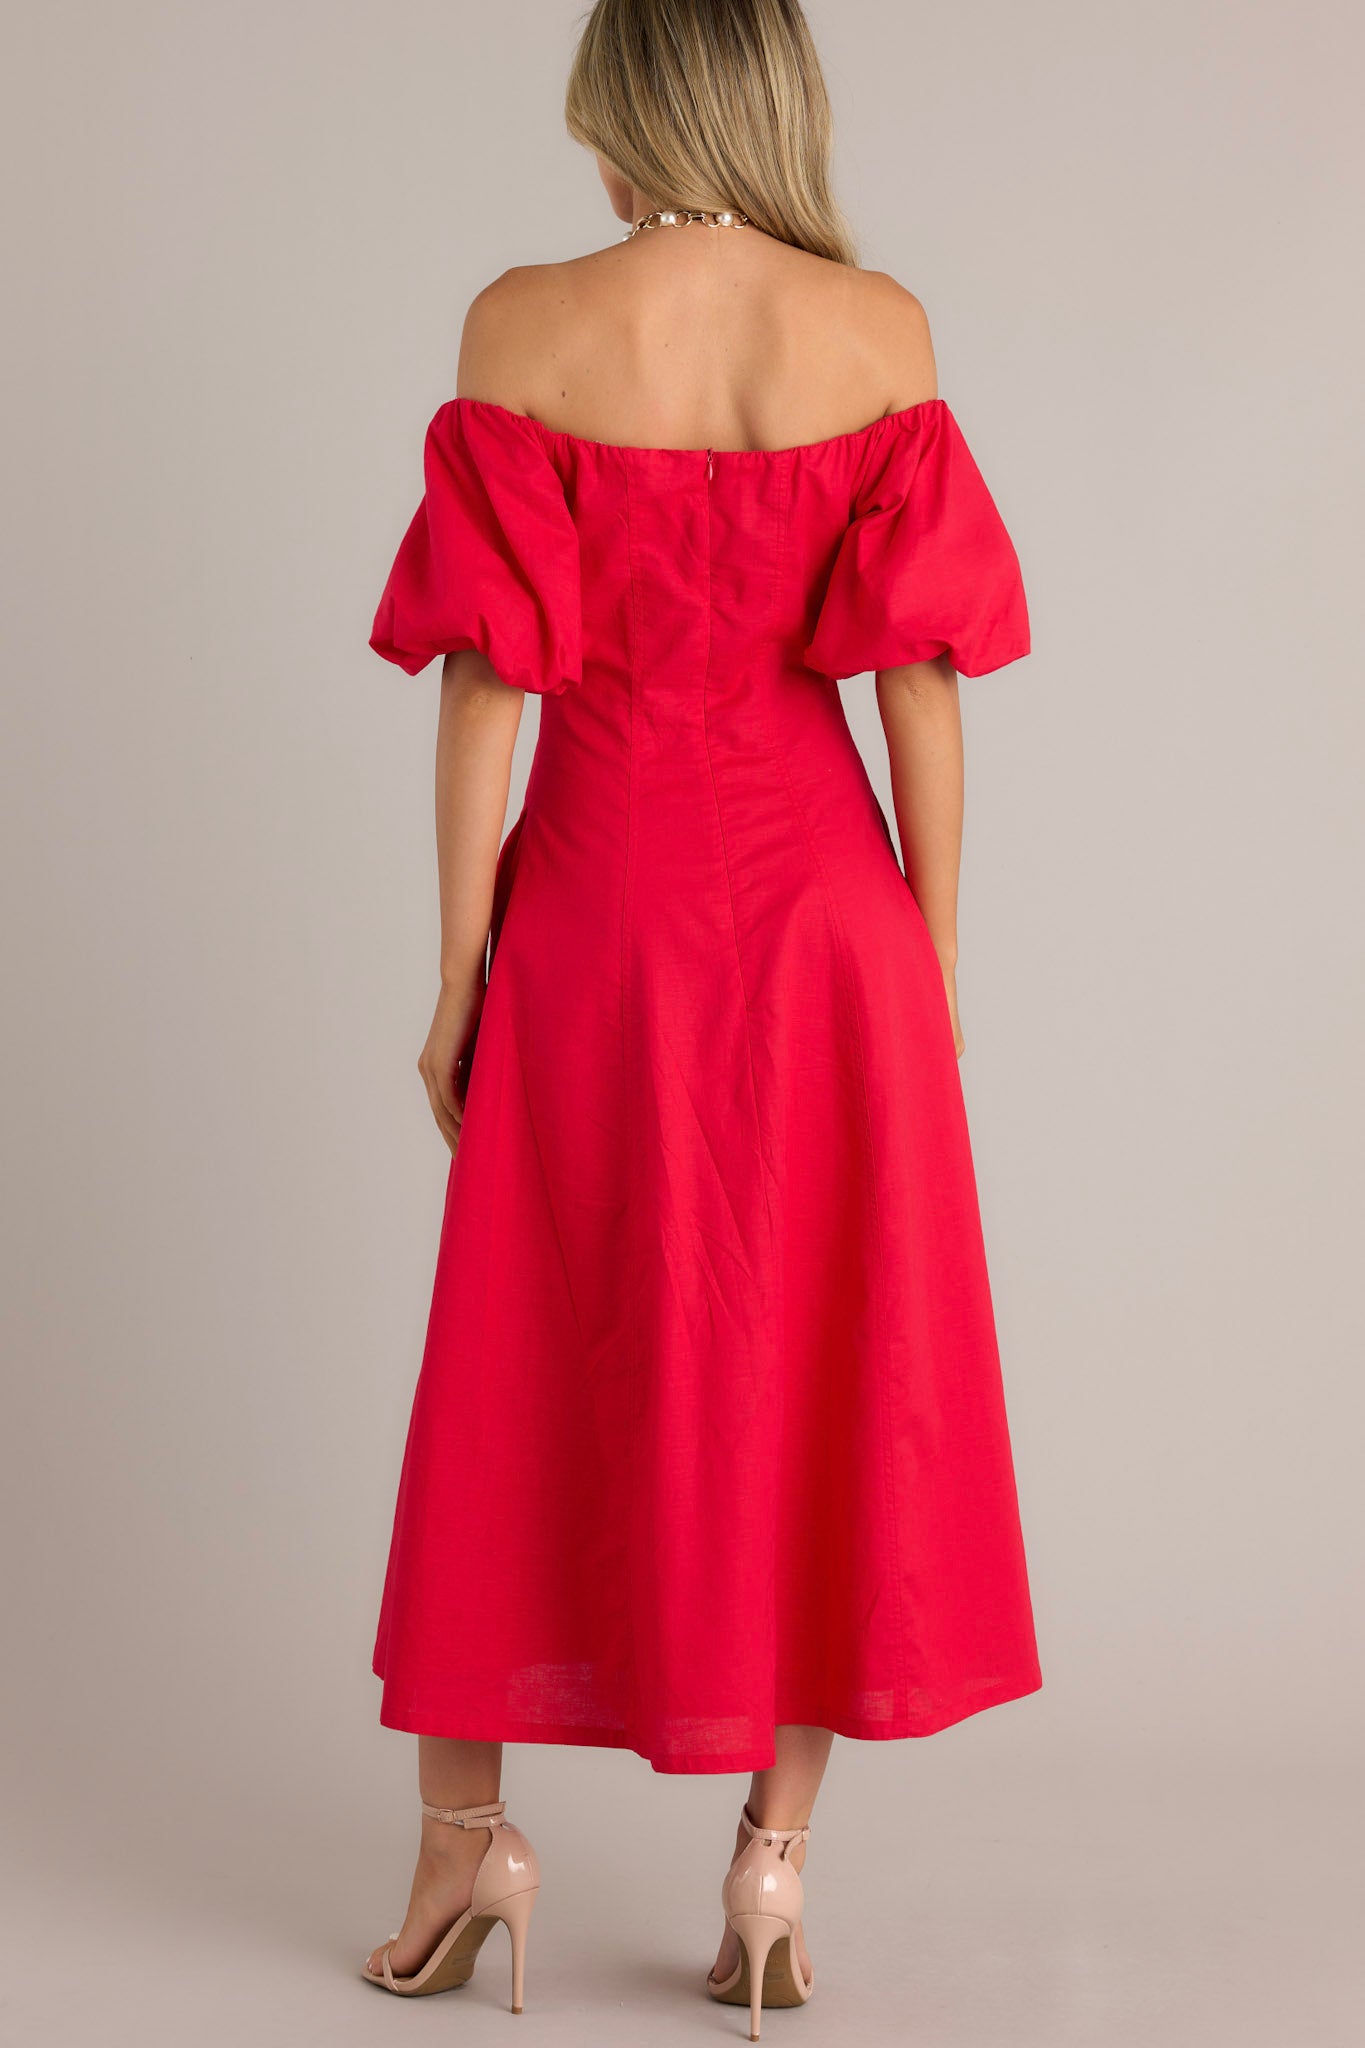 Back view of an elegant off-the-shoulder red dress with dramatic puffed sleeves, a fitted bodice, and a flowing ankle-length skirt.